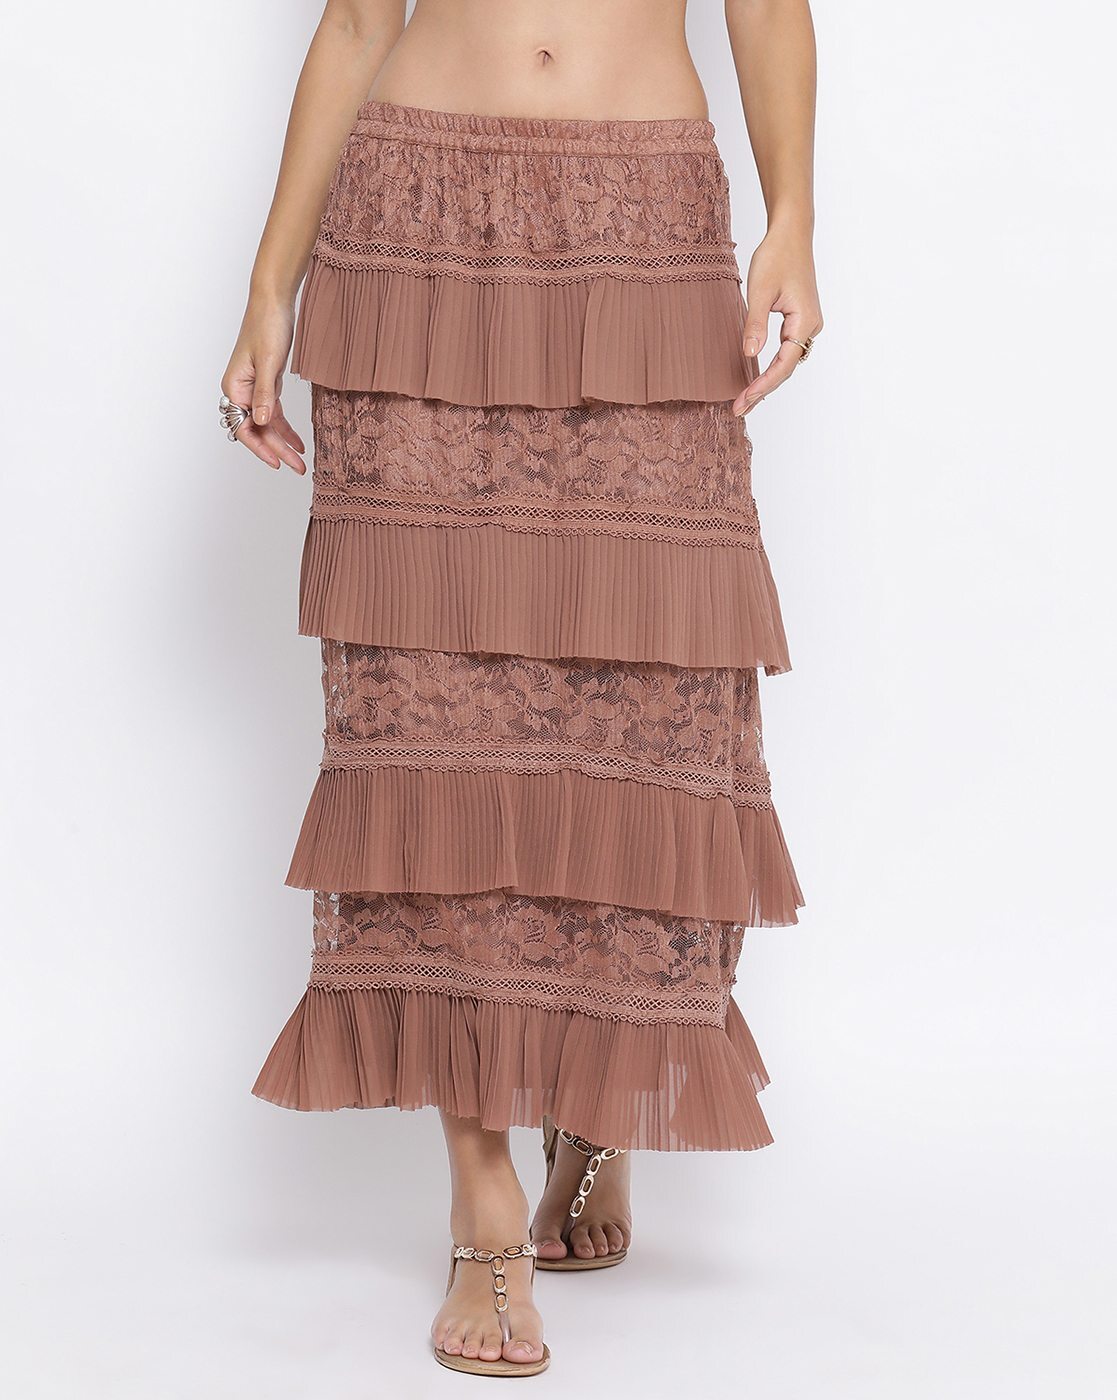 Discover more than 149 layered skirt latest